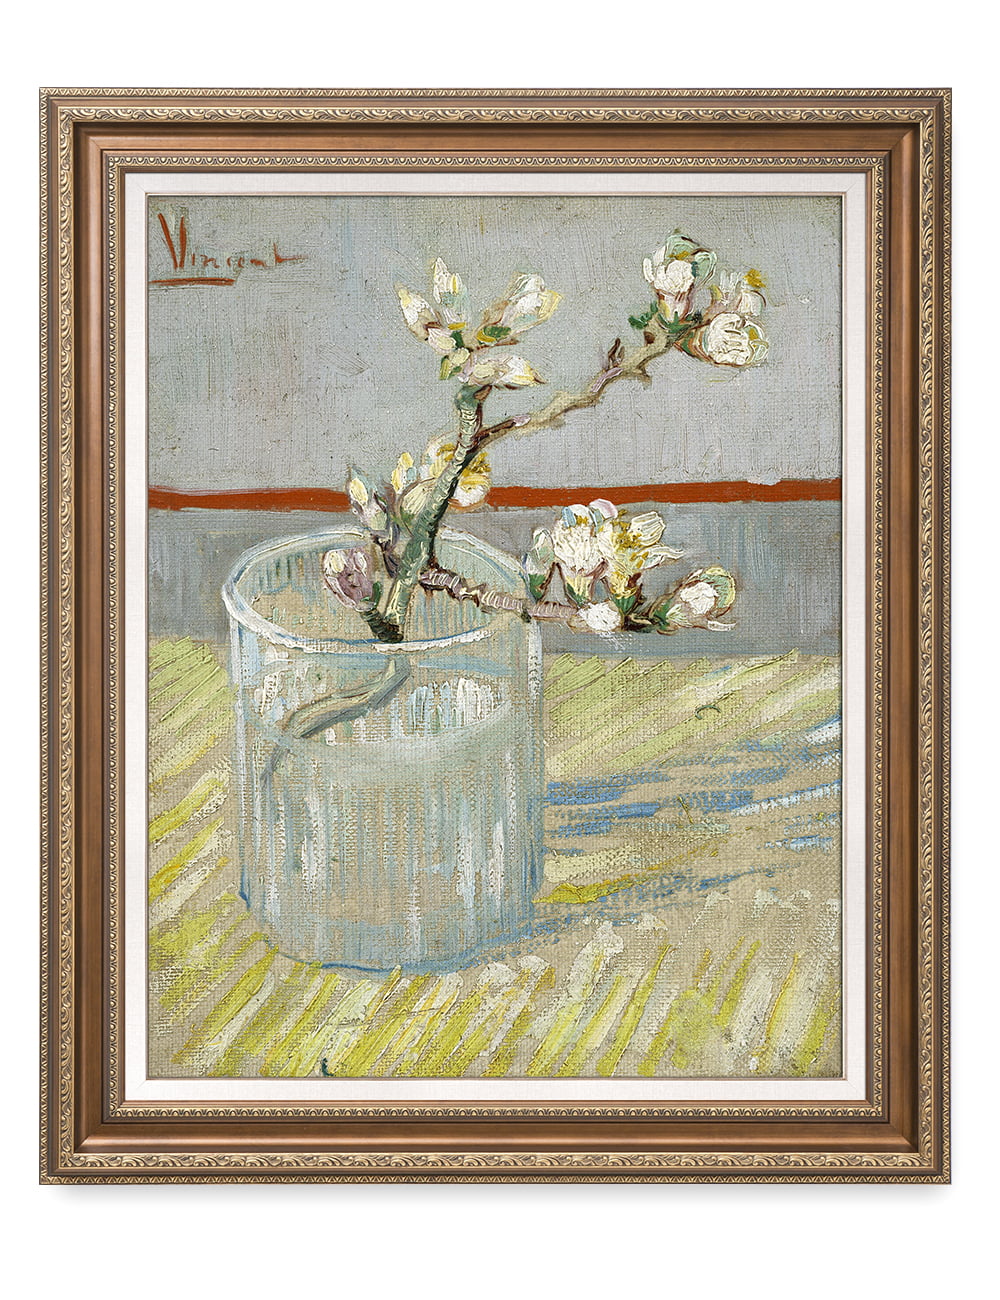 DECORARTS Sprig of Flowering Almond Blossom in a Glass, Vincent Van Gogh  Art Reproduction. Acid Free Cotton Canvas Giclee Print w/ Bronze FrameMat  for Wall Decor. Framed Size: 35x29 in